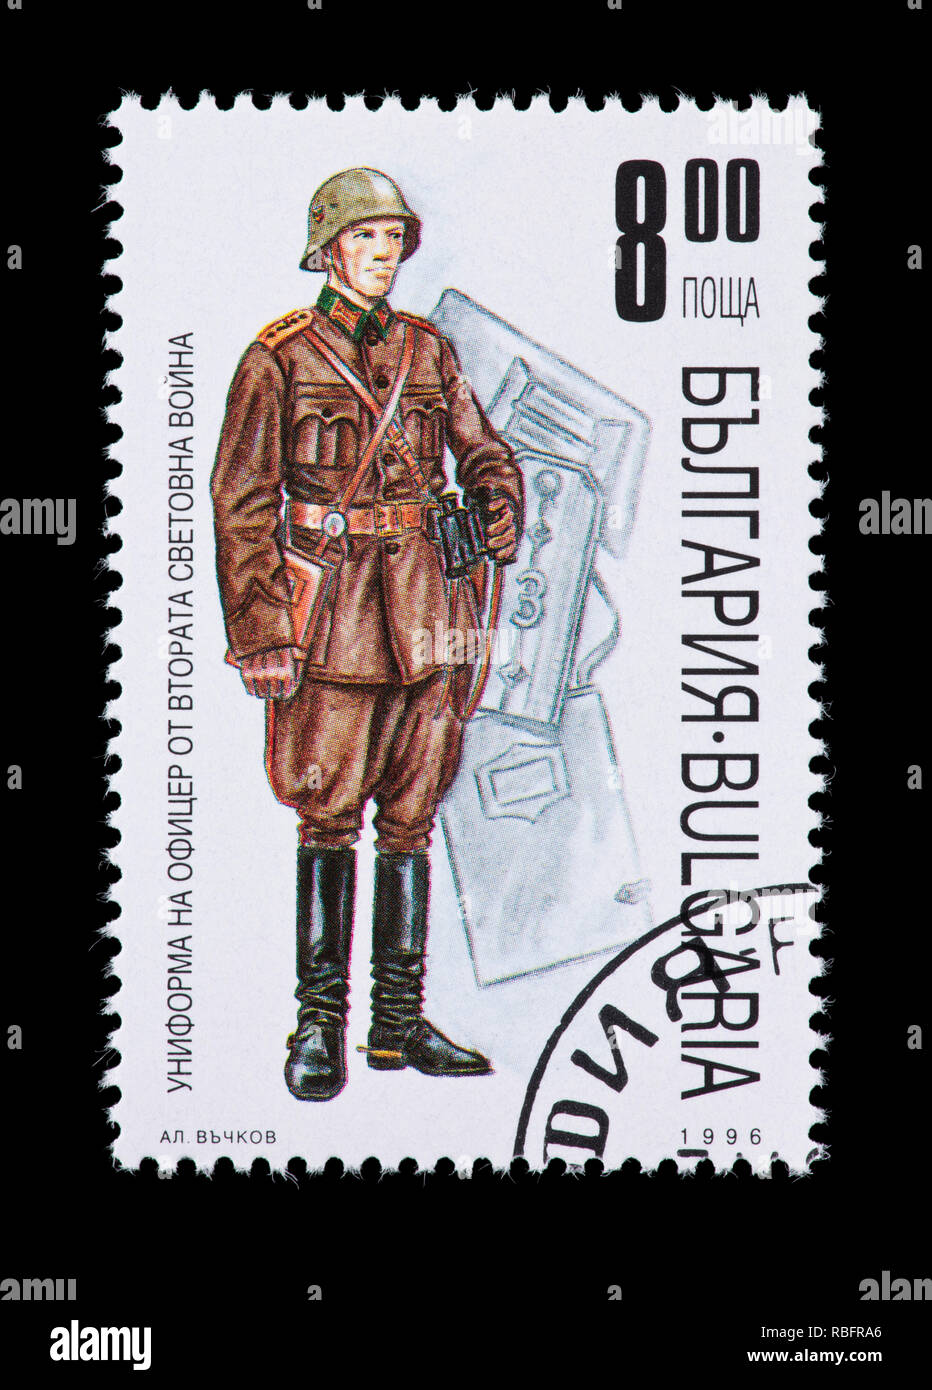 Postage stamp from Bulgaria depicting a soldier's brown combat uniform with helmet. Stock Photo